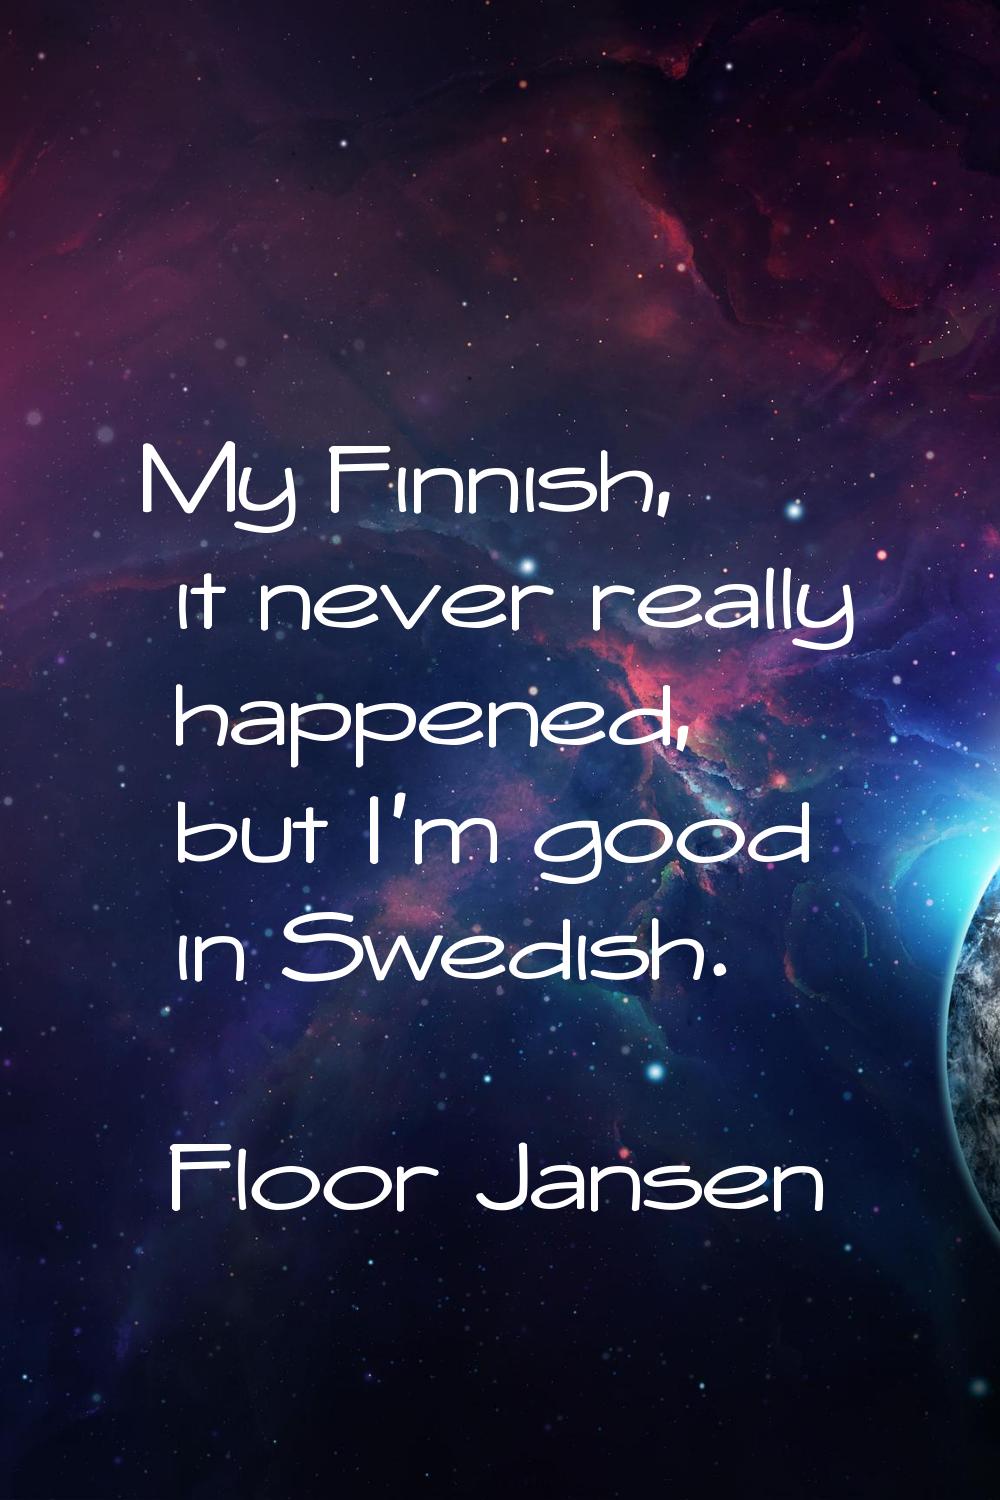 My Finnish, it never really happened, but I'm good in Swedish.